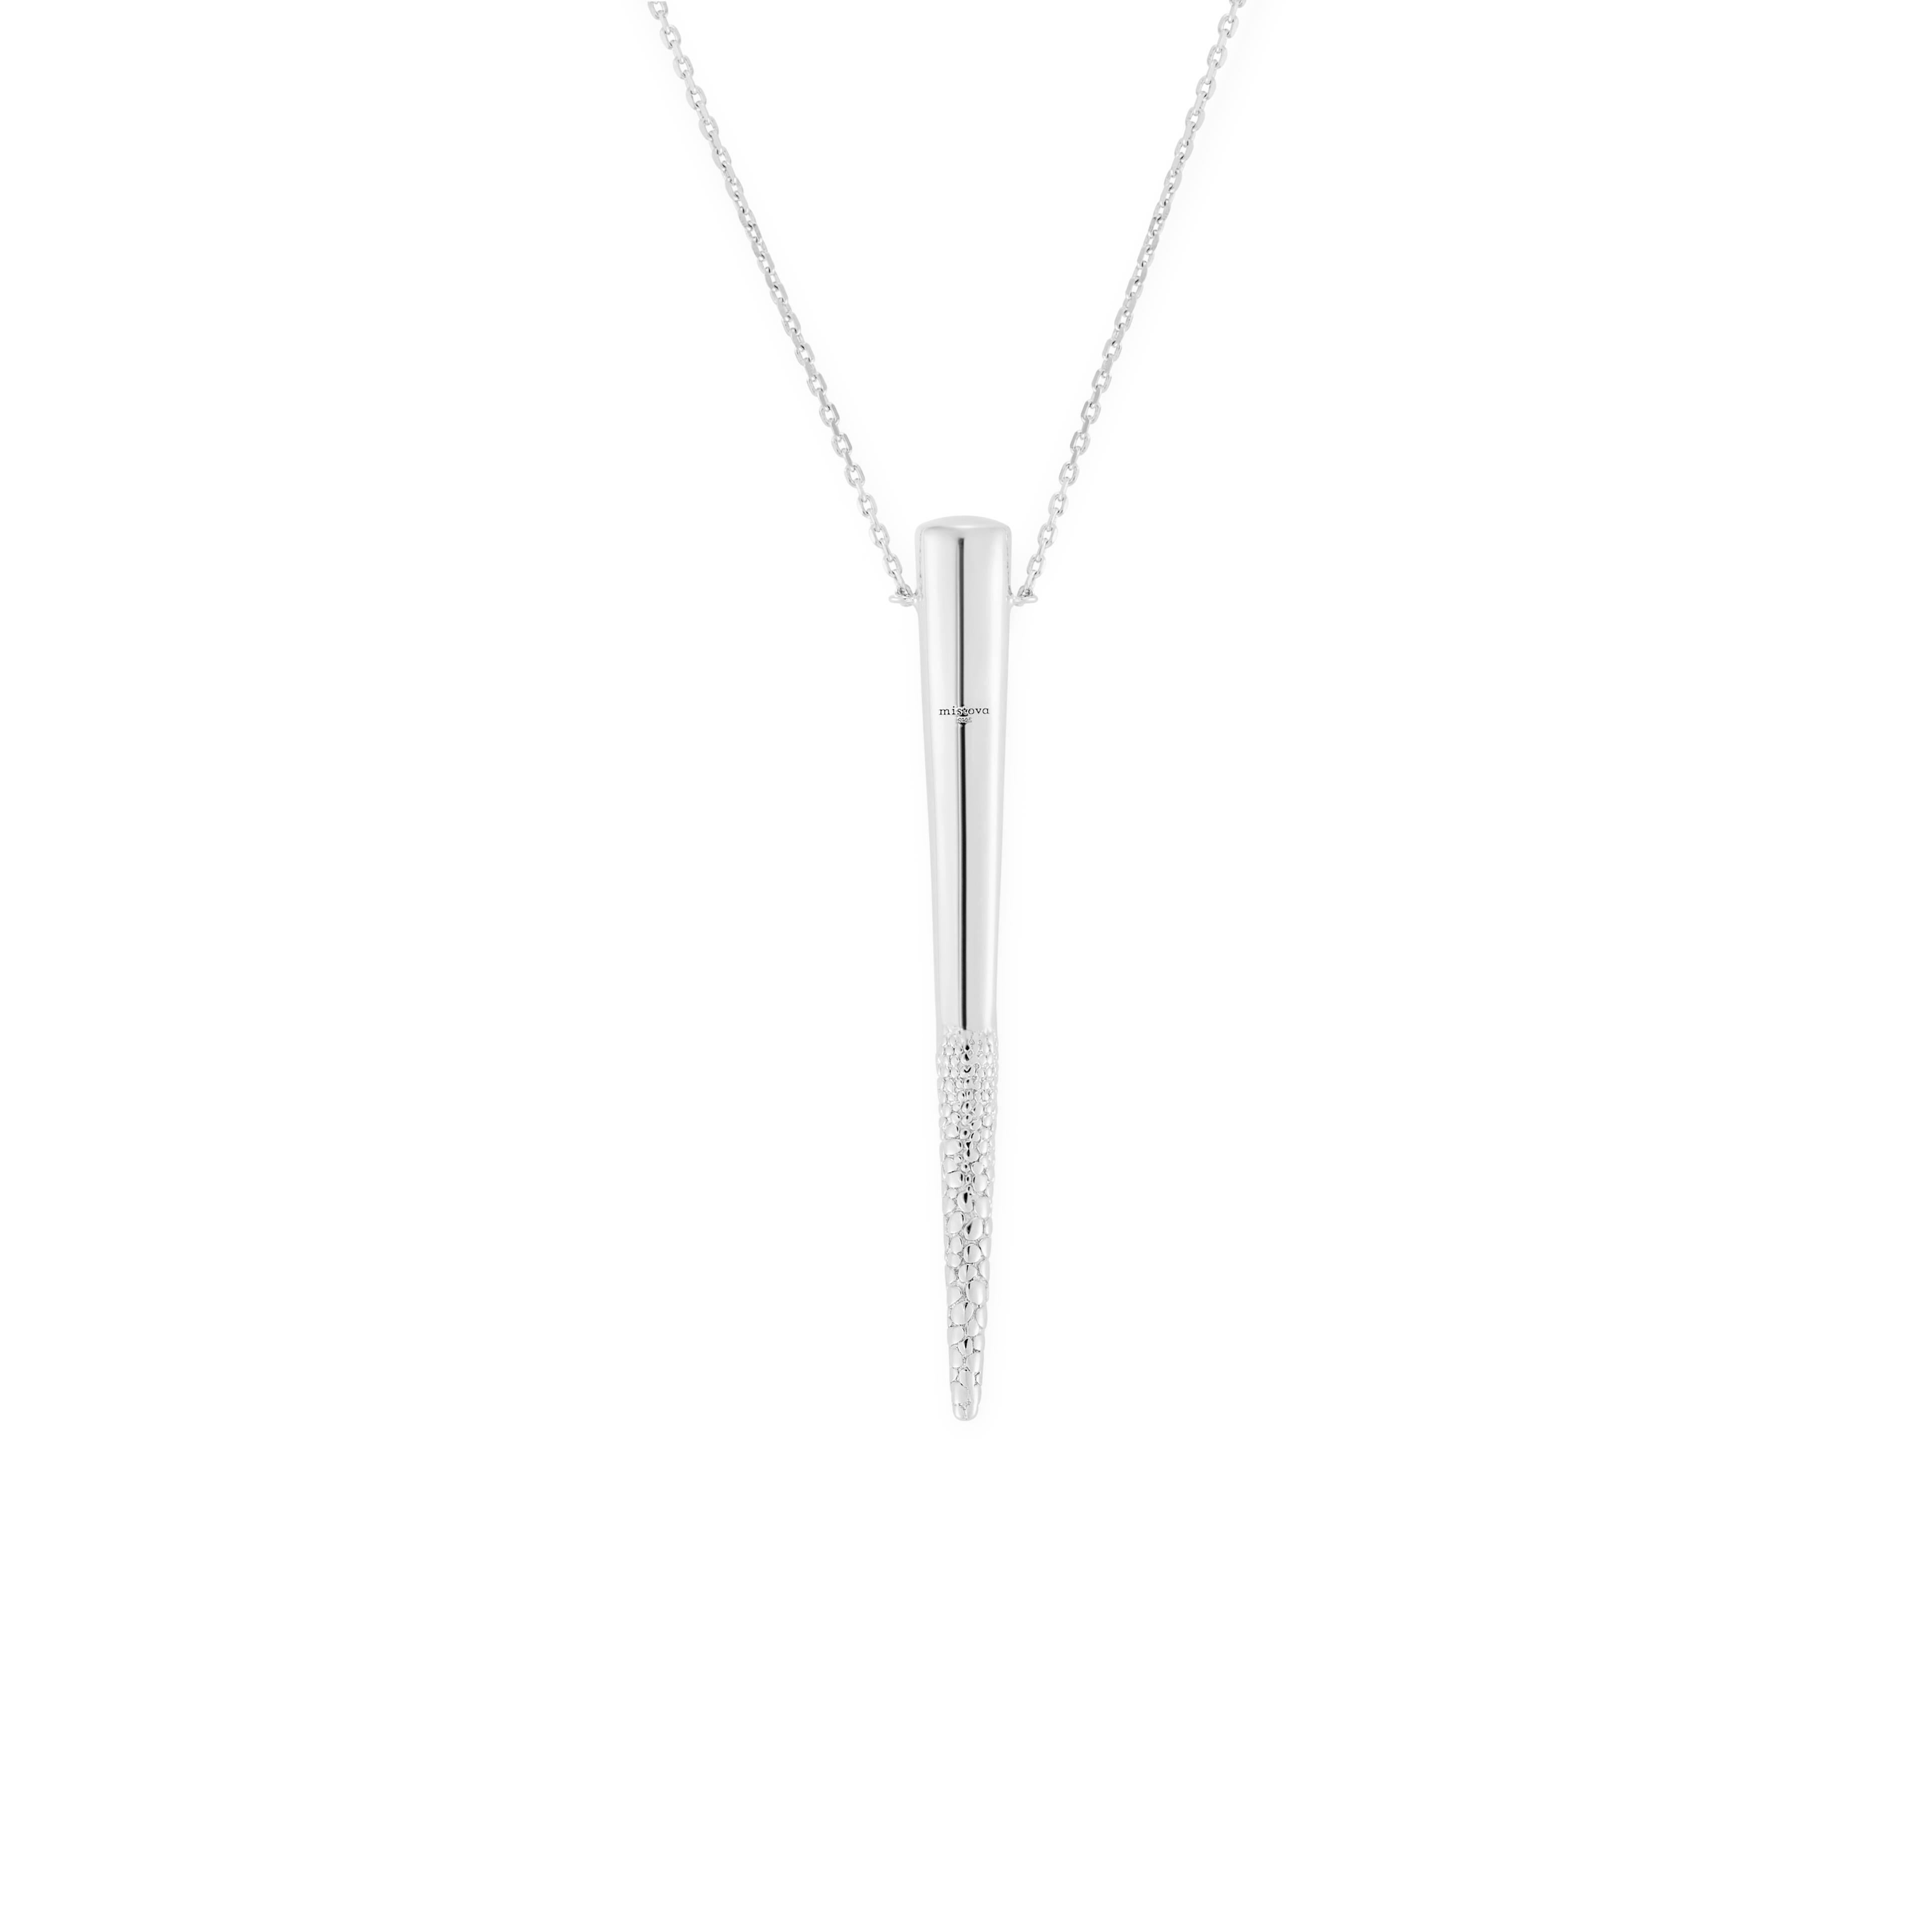 Sharp strong and effortless. Mistova;s silver Particle necklace is a easy to wear beautifully crafted necklace. Made from highest quality silver. 